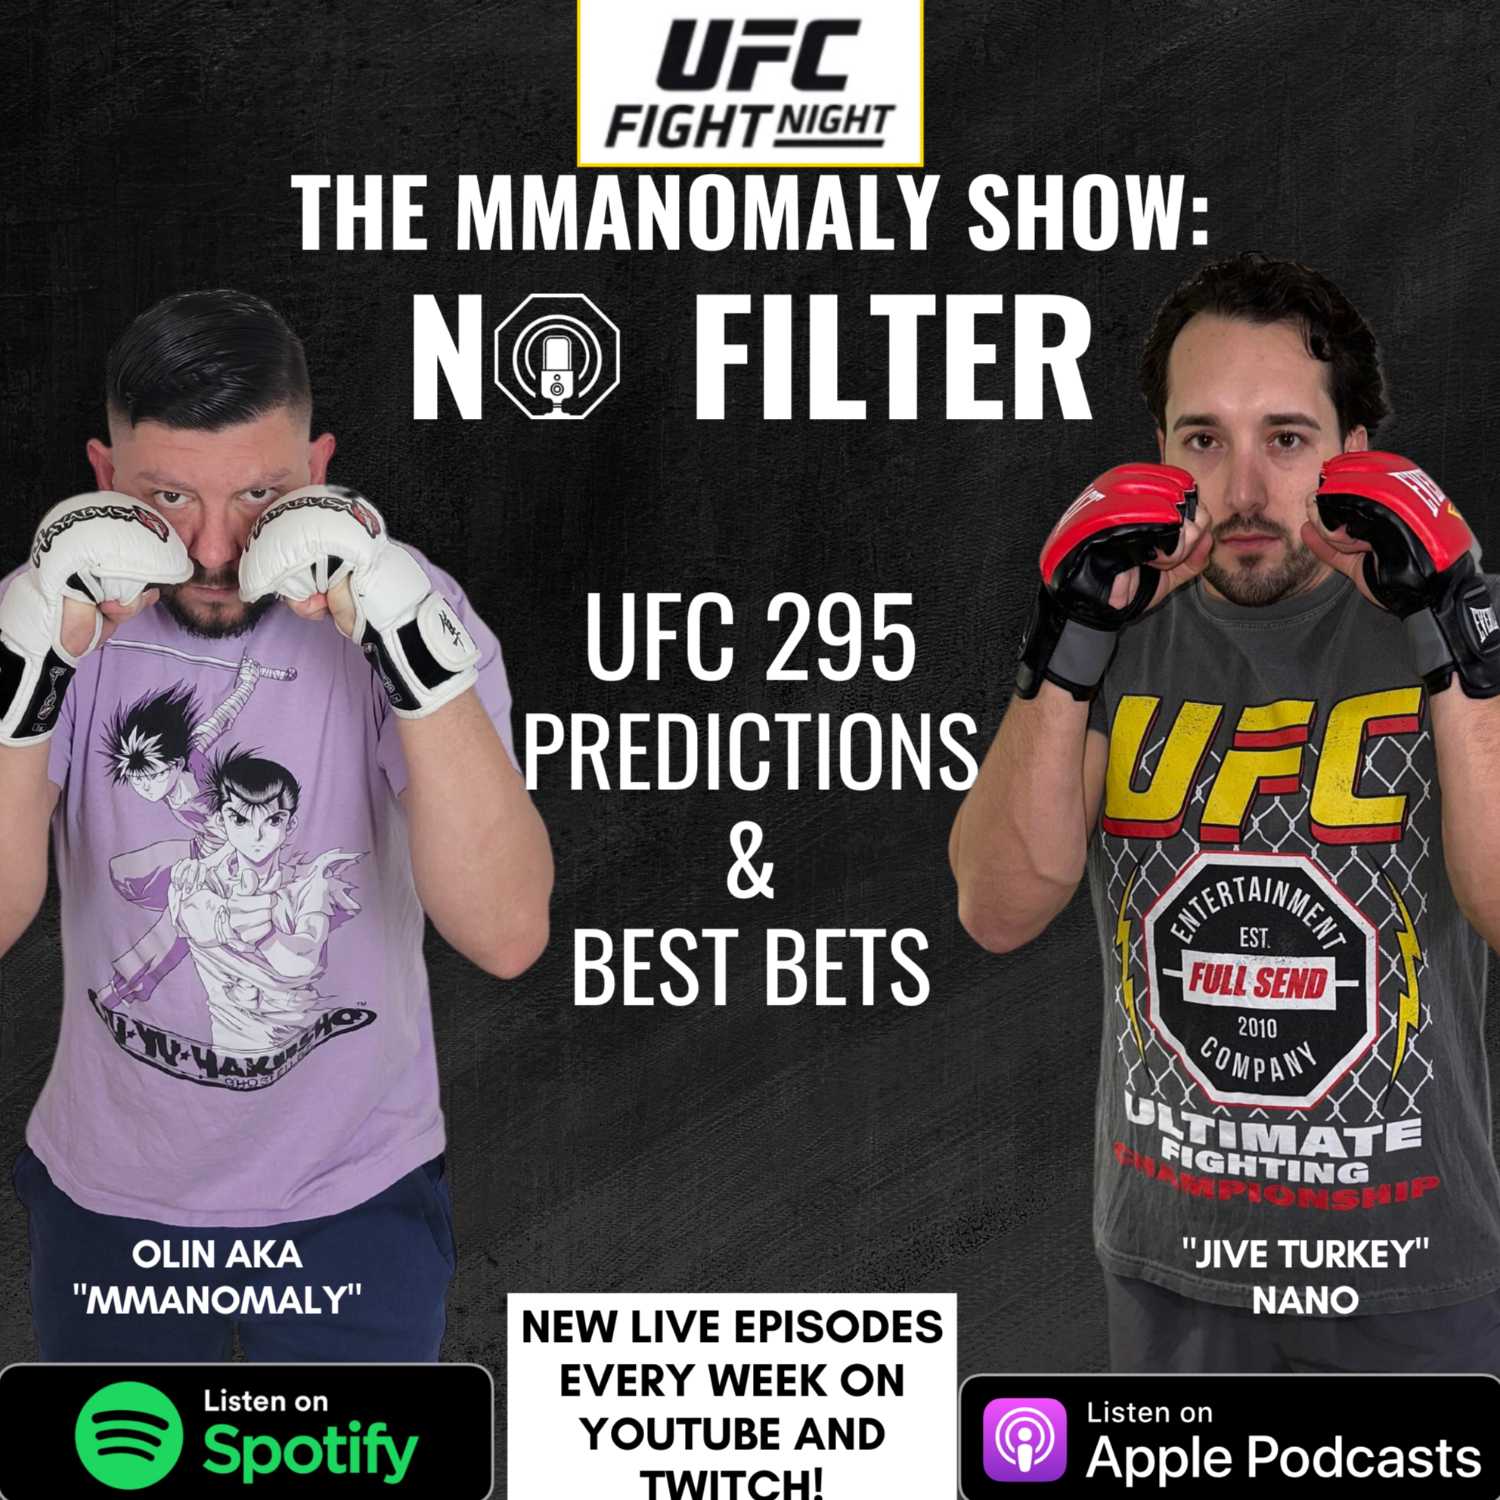 UFC Austin Predictions & Best Bets | The MMAnomaly Show: No Filter